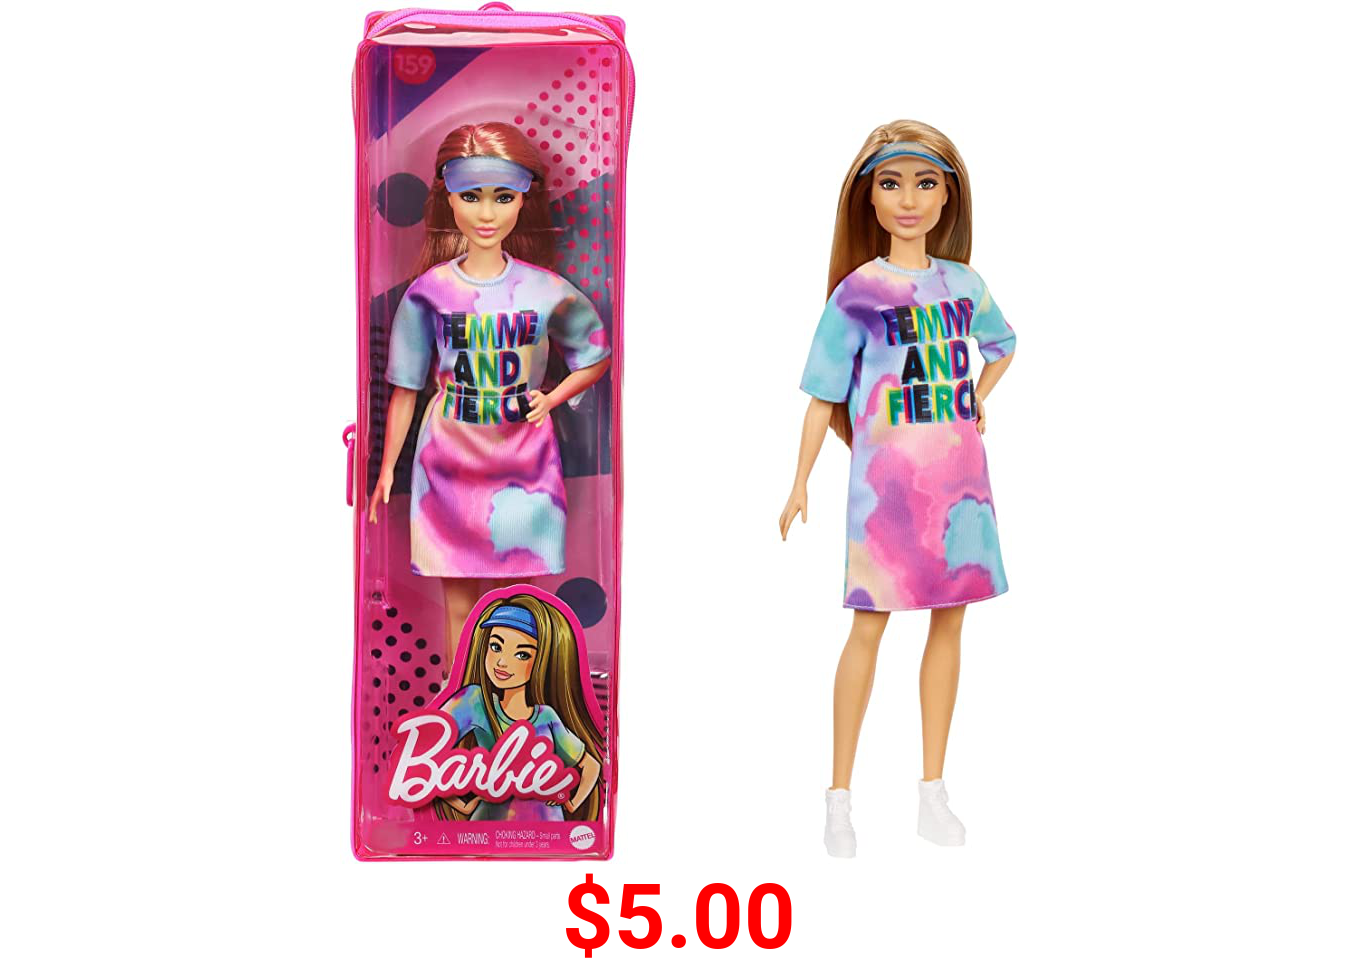 Barbie Fashionistas Doll, Petite, with Light Brown Hair Wearing Tie-Dye T-Shirt Dress, White Shoes & Visor, Toy for Kids 3 to 8 Years Old